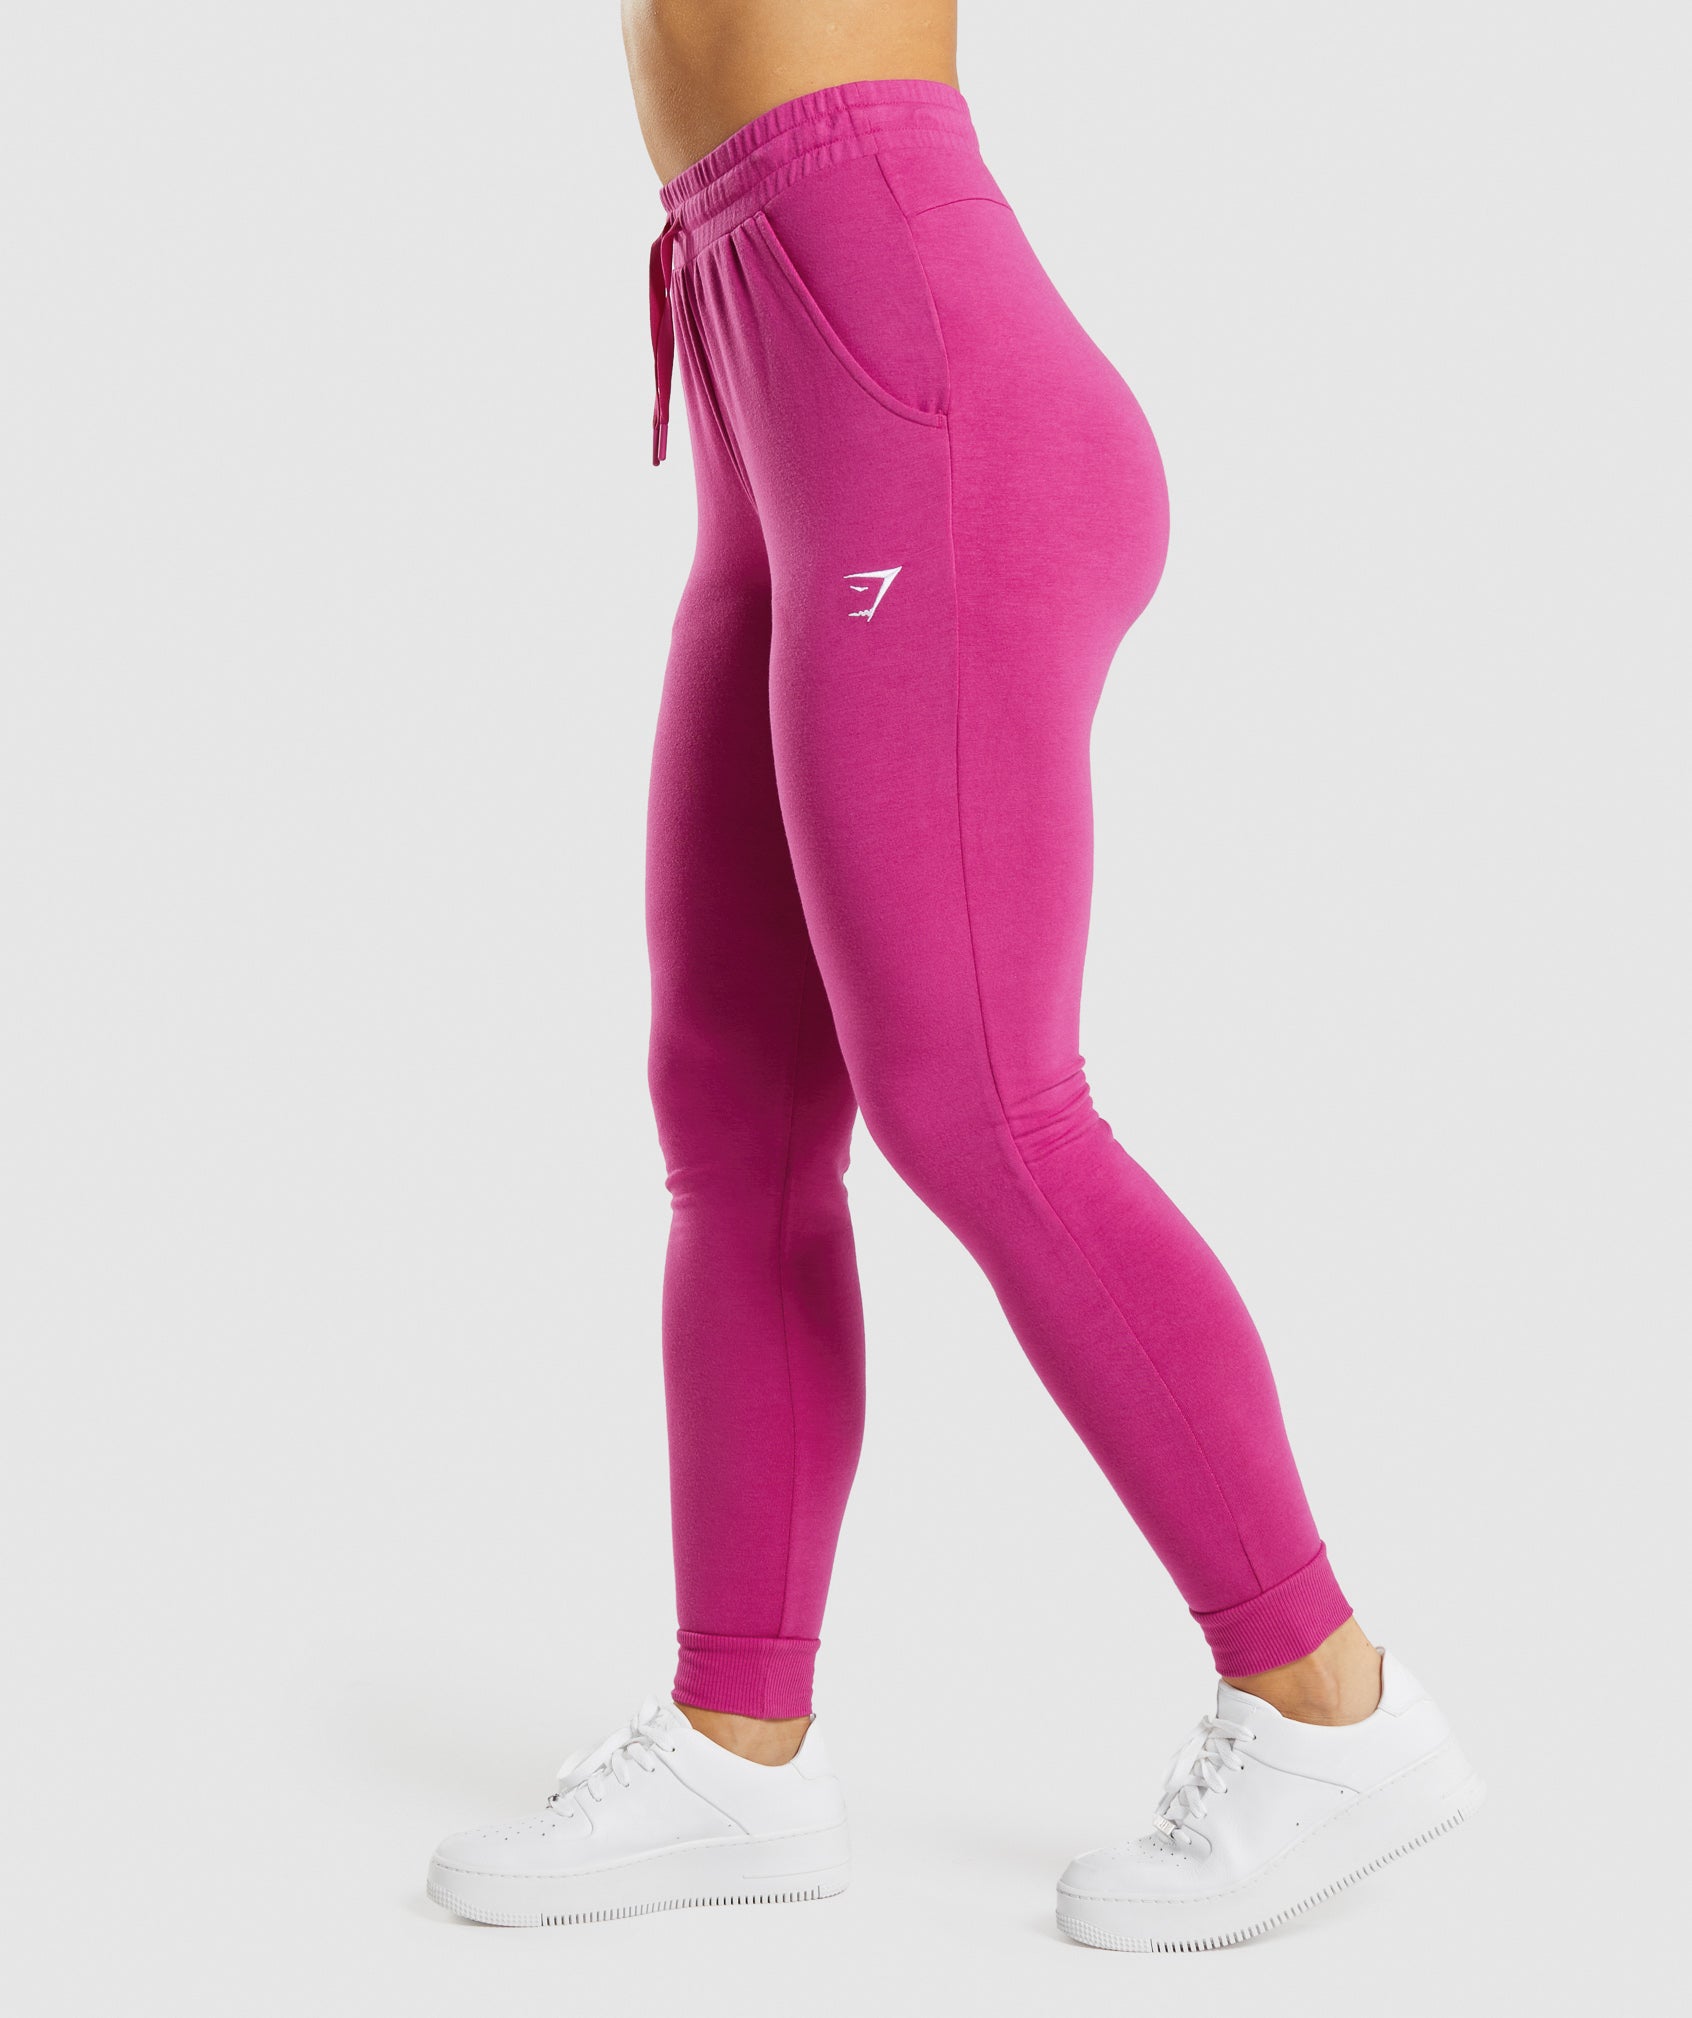 Training Pippa Joggers in Dragon Pink - view 3